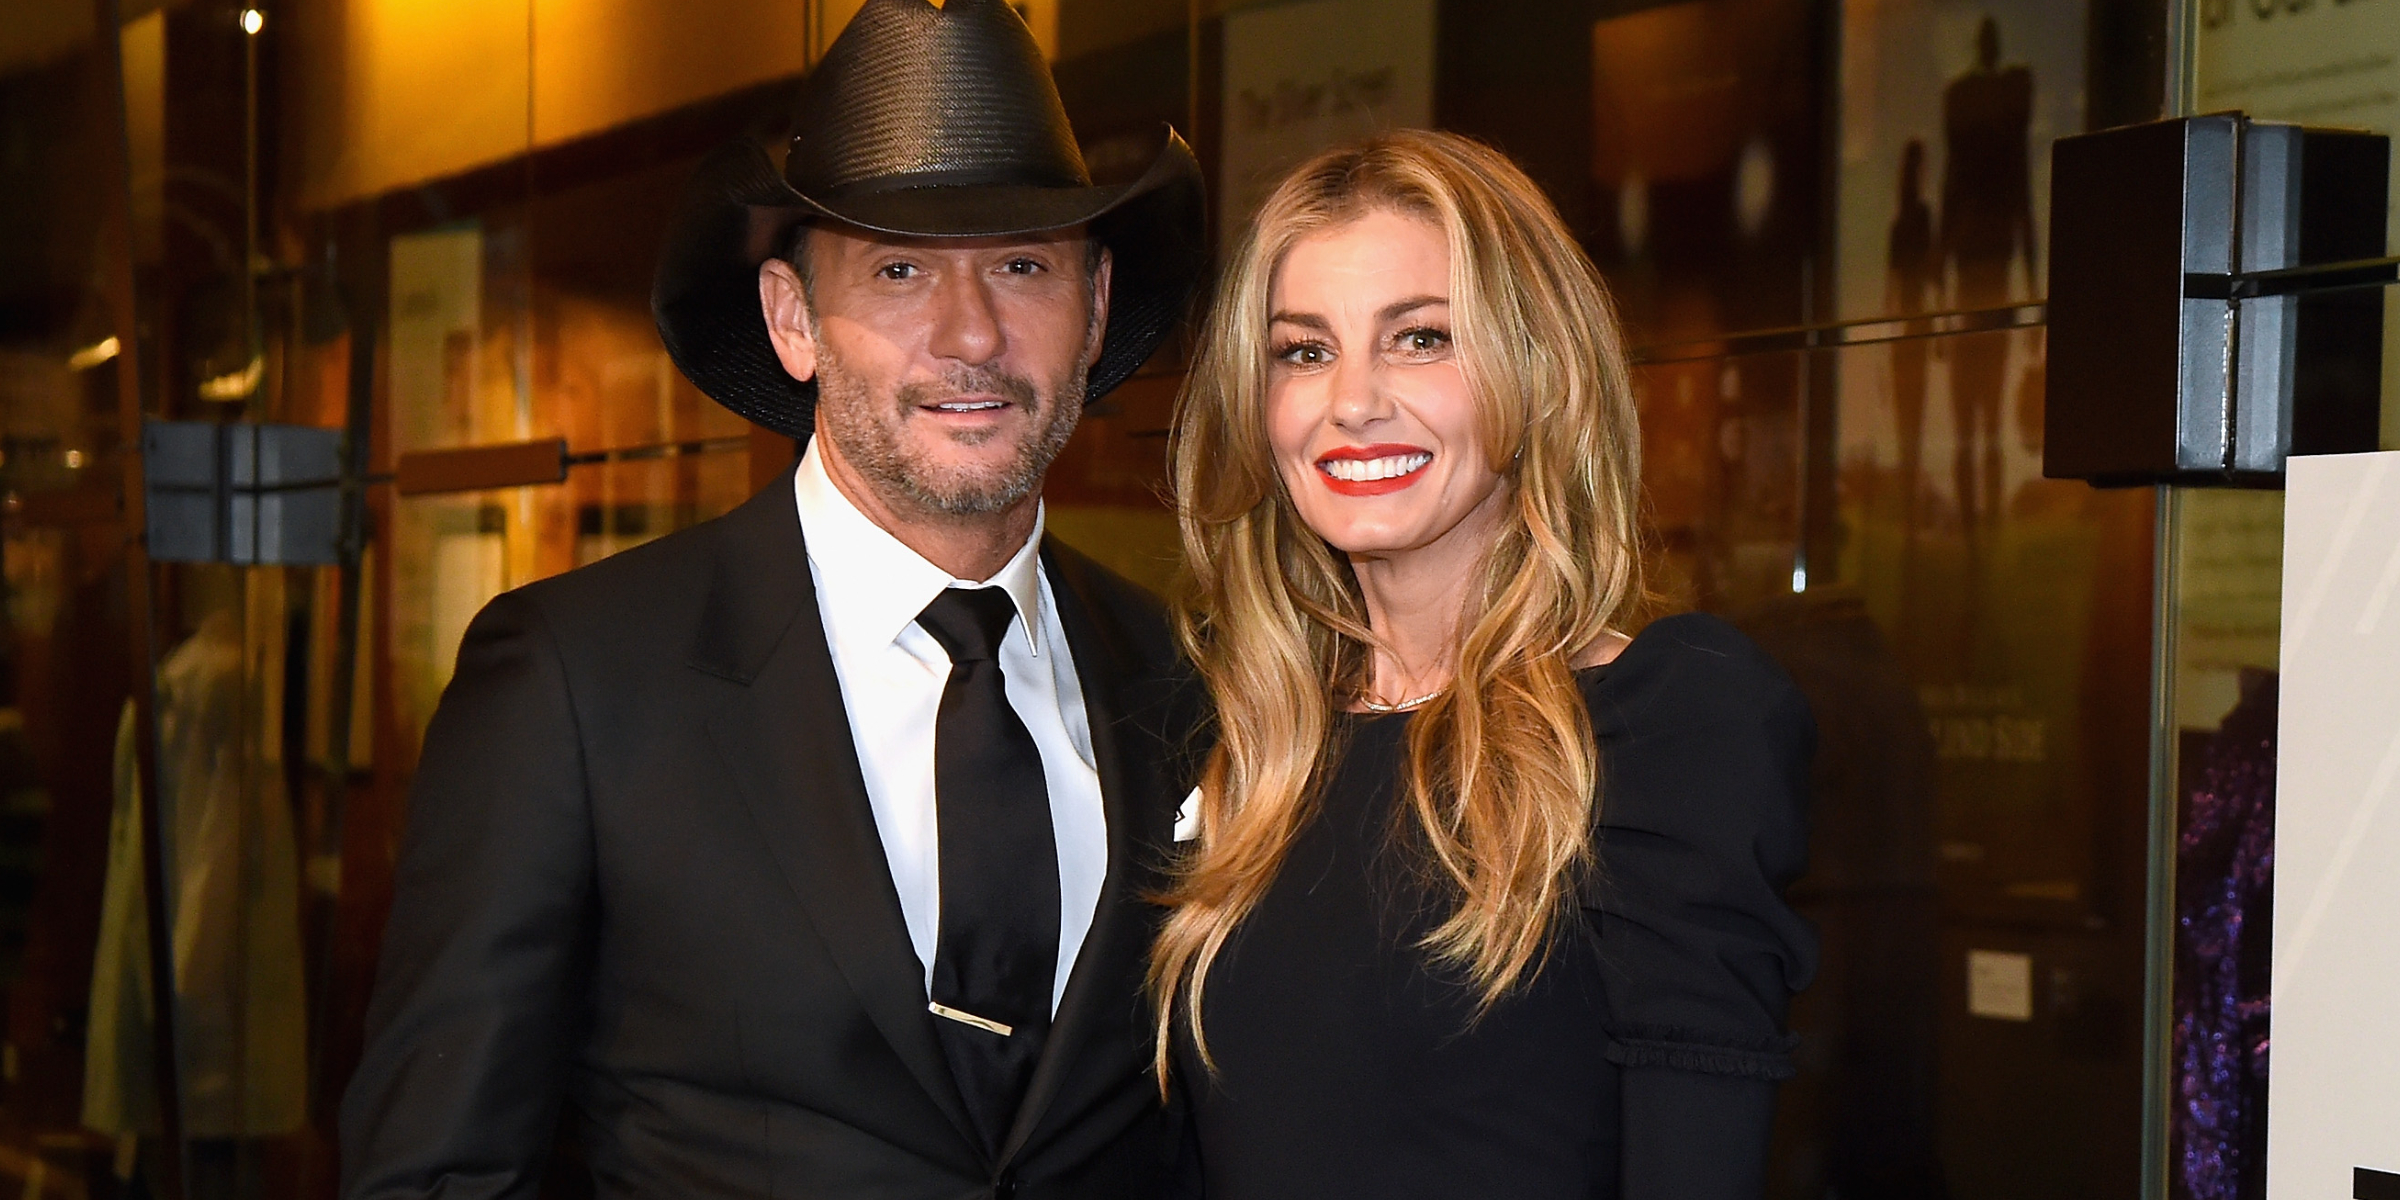 Tim McGraw and Faith Hill | Source: Getty Images